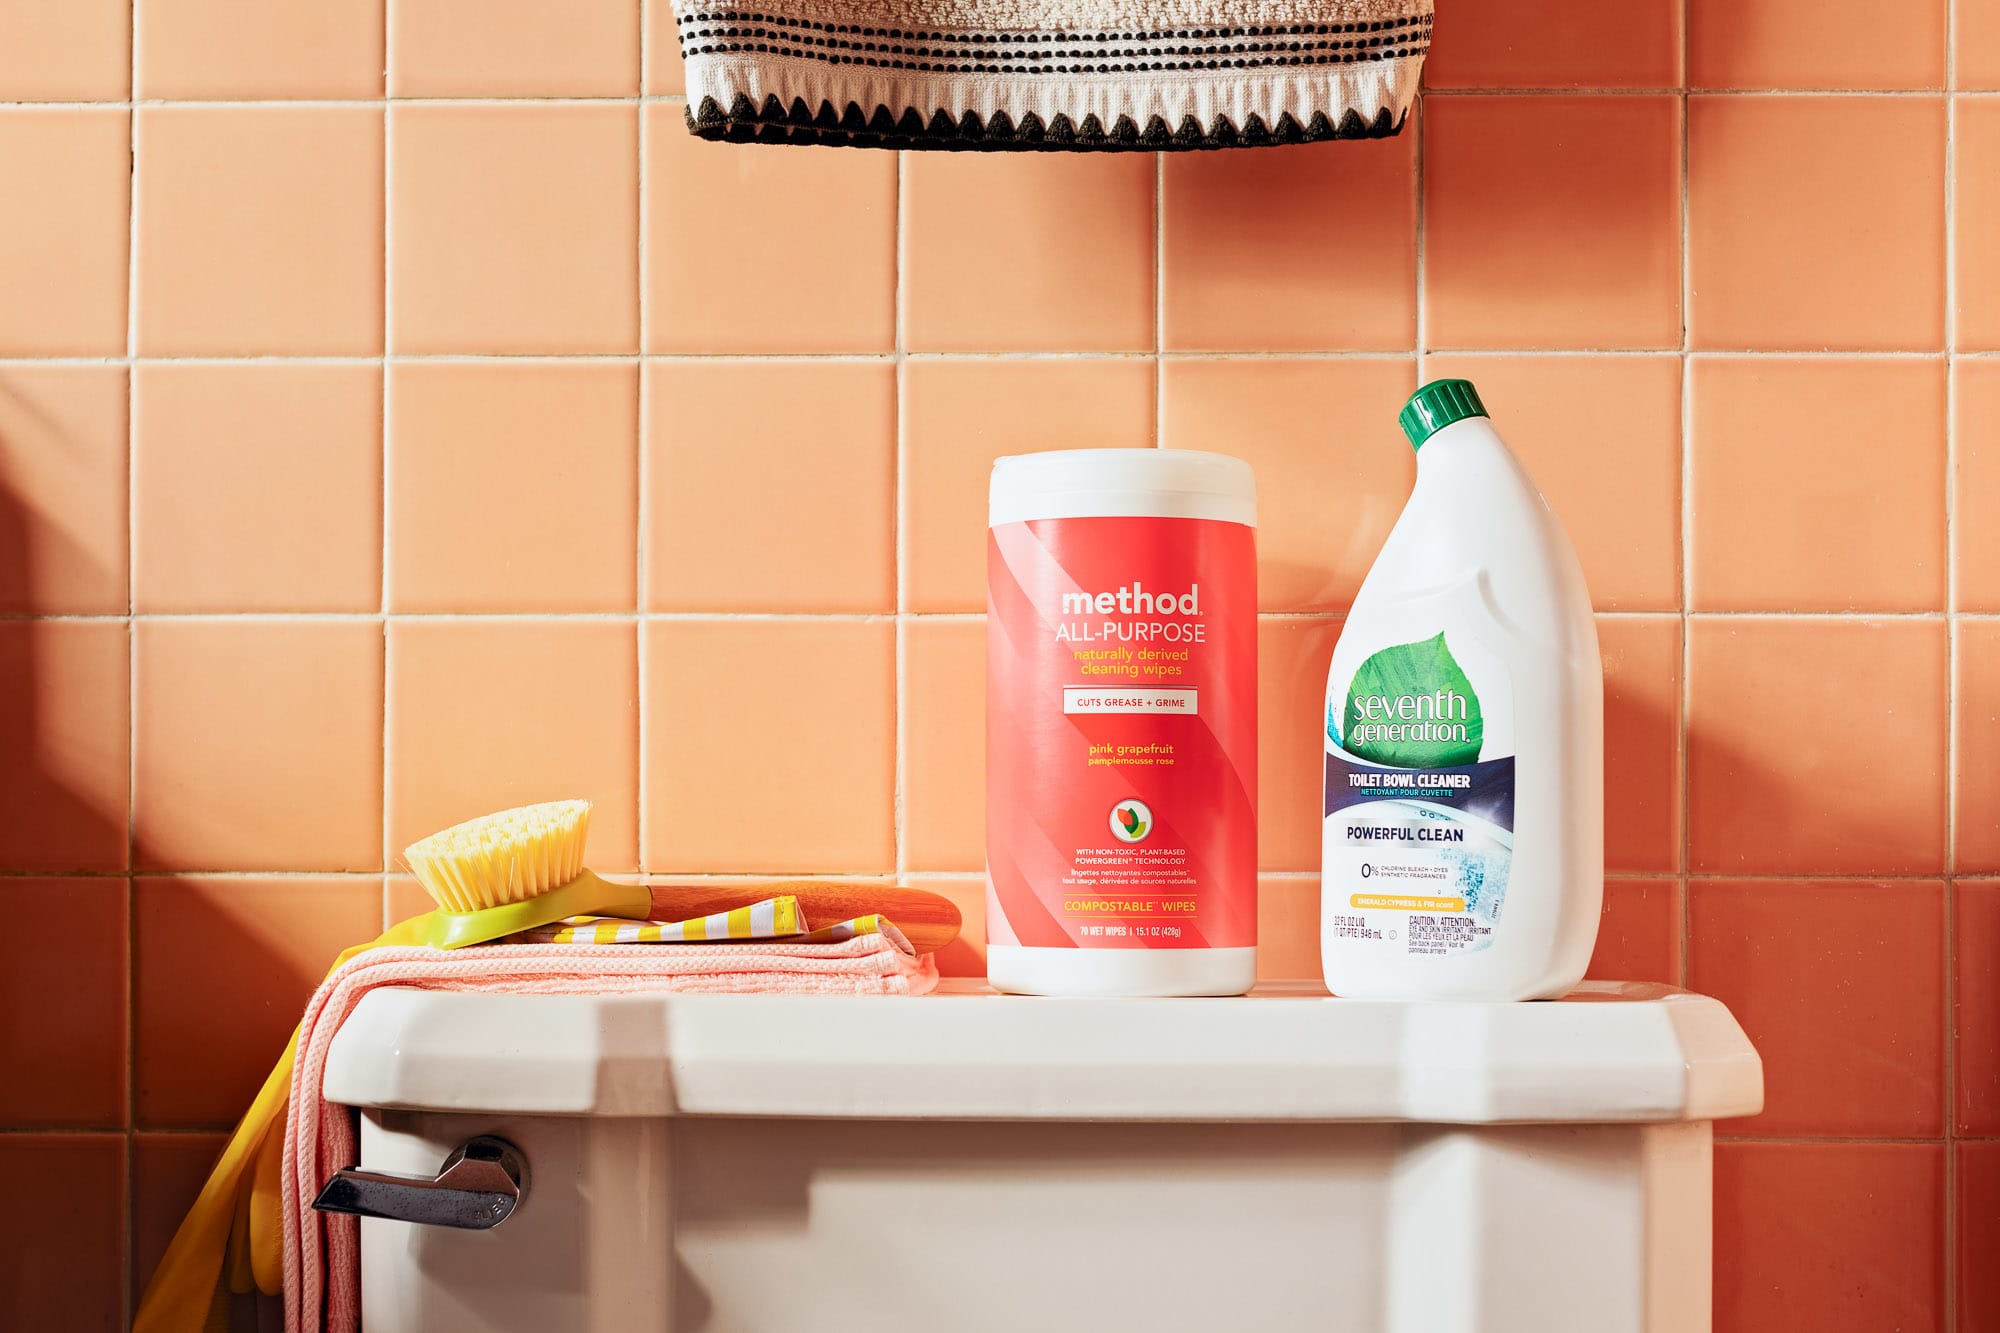 Target Everspring Cleaning Products, Decor Trends & Design News